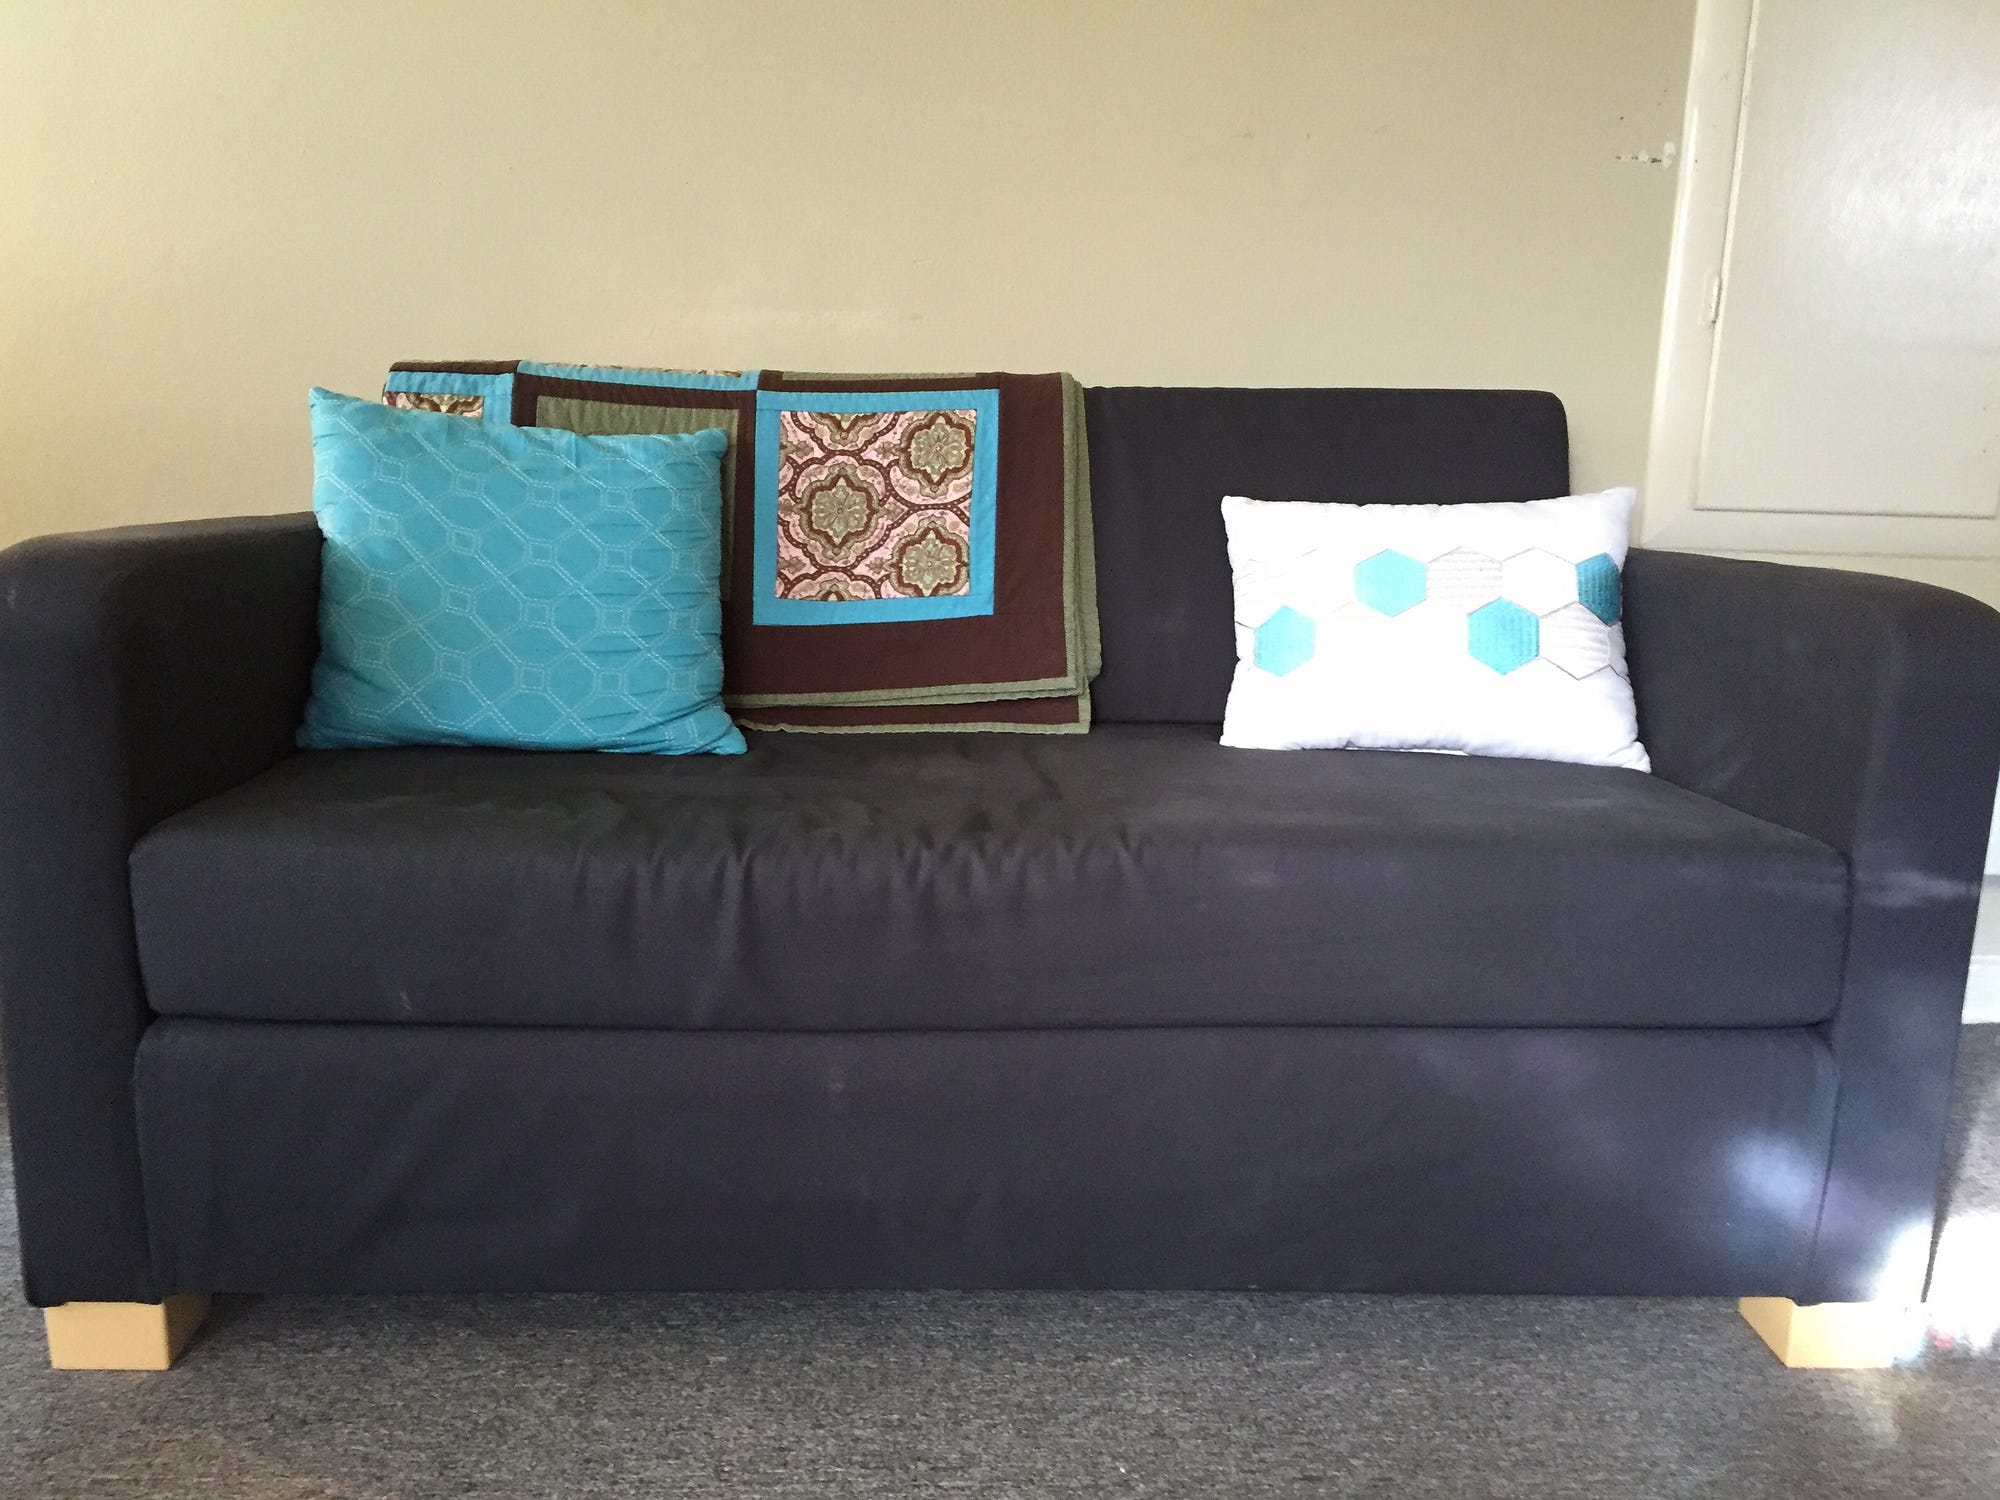 One Year With Ikea's Second-Cheapest Sleeper Sofa | by Nicole Dieker | The  Billfold | Medium